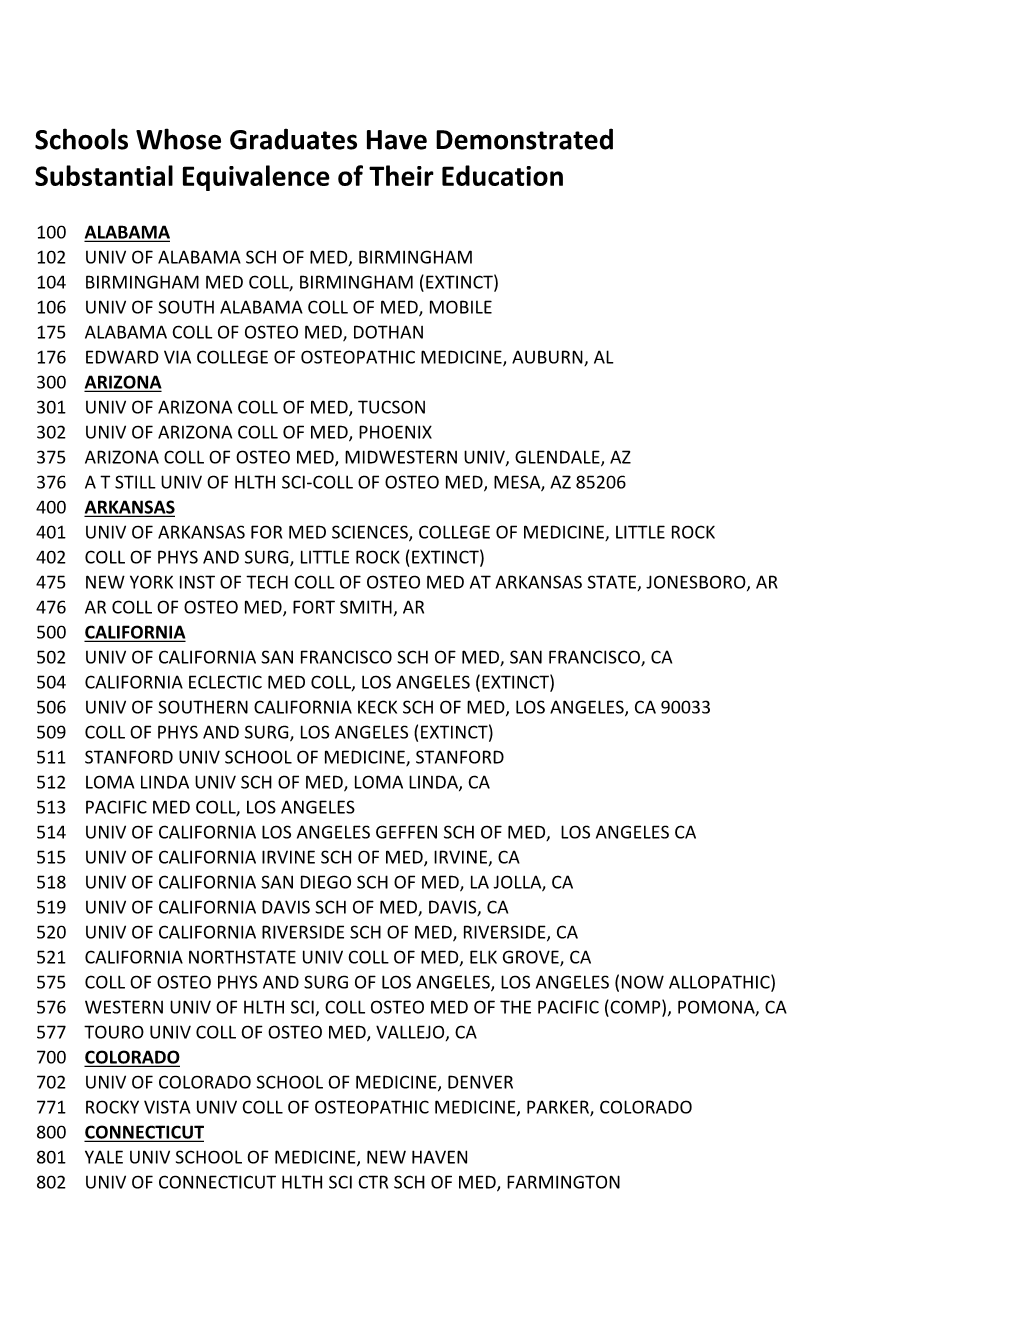 Schools Whose Graduates Have Demonstrated Substantial Equivalence of Their Education